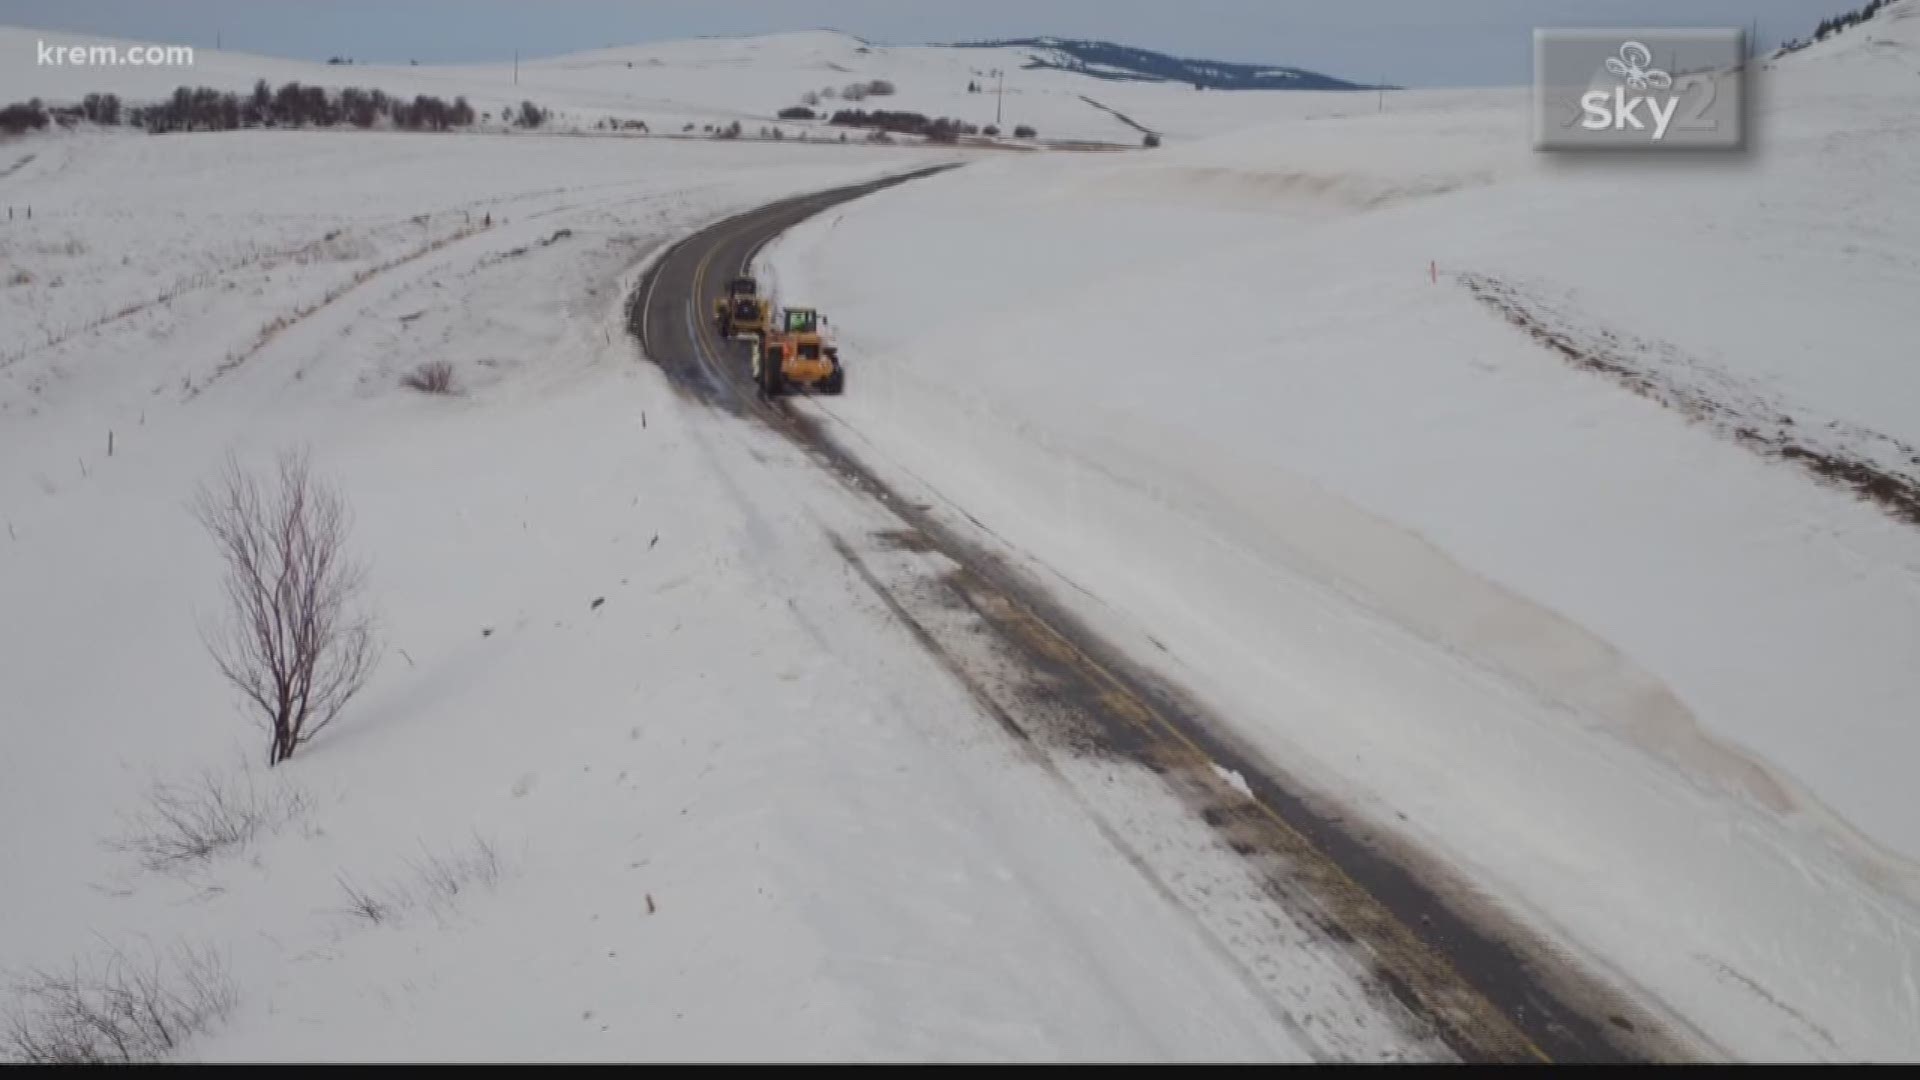 Spokane county plow crews work to clear highway 27 of large snow drifts.